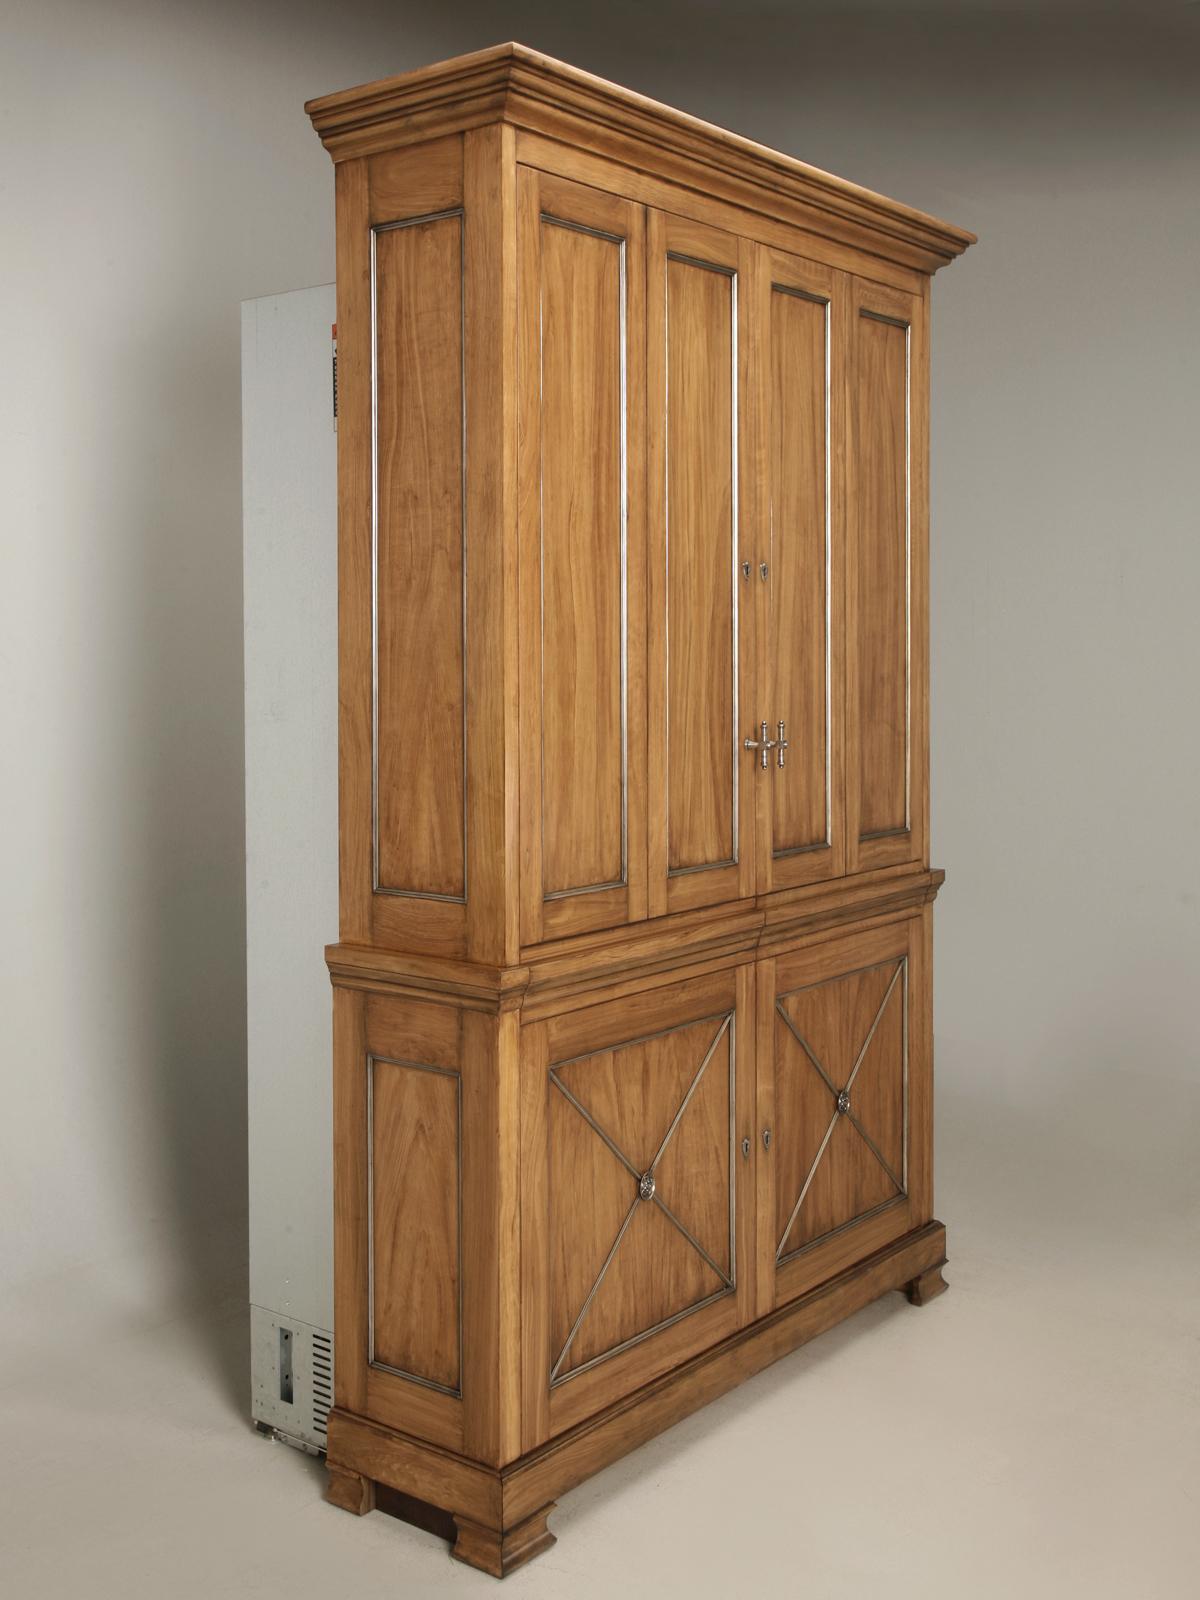 Made in house in our Old Plank cabinetry department, this is our absolute favorite way to completely integrate your Sub-Zero refrigerators, and make them virtually disappear from your kitchen. French Directoire style cabinet, can be produced in any